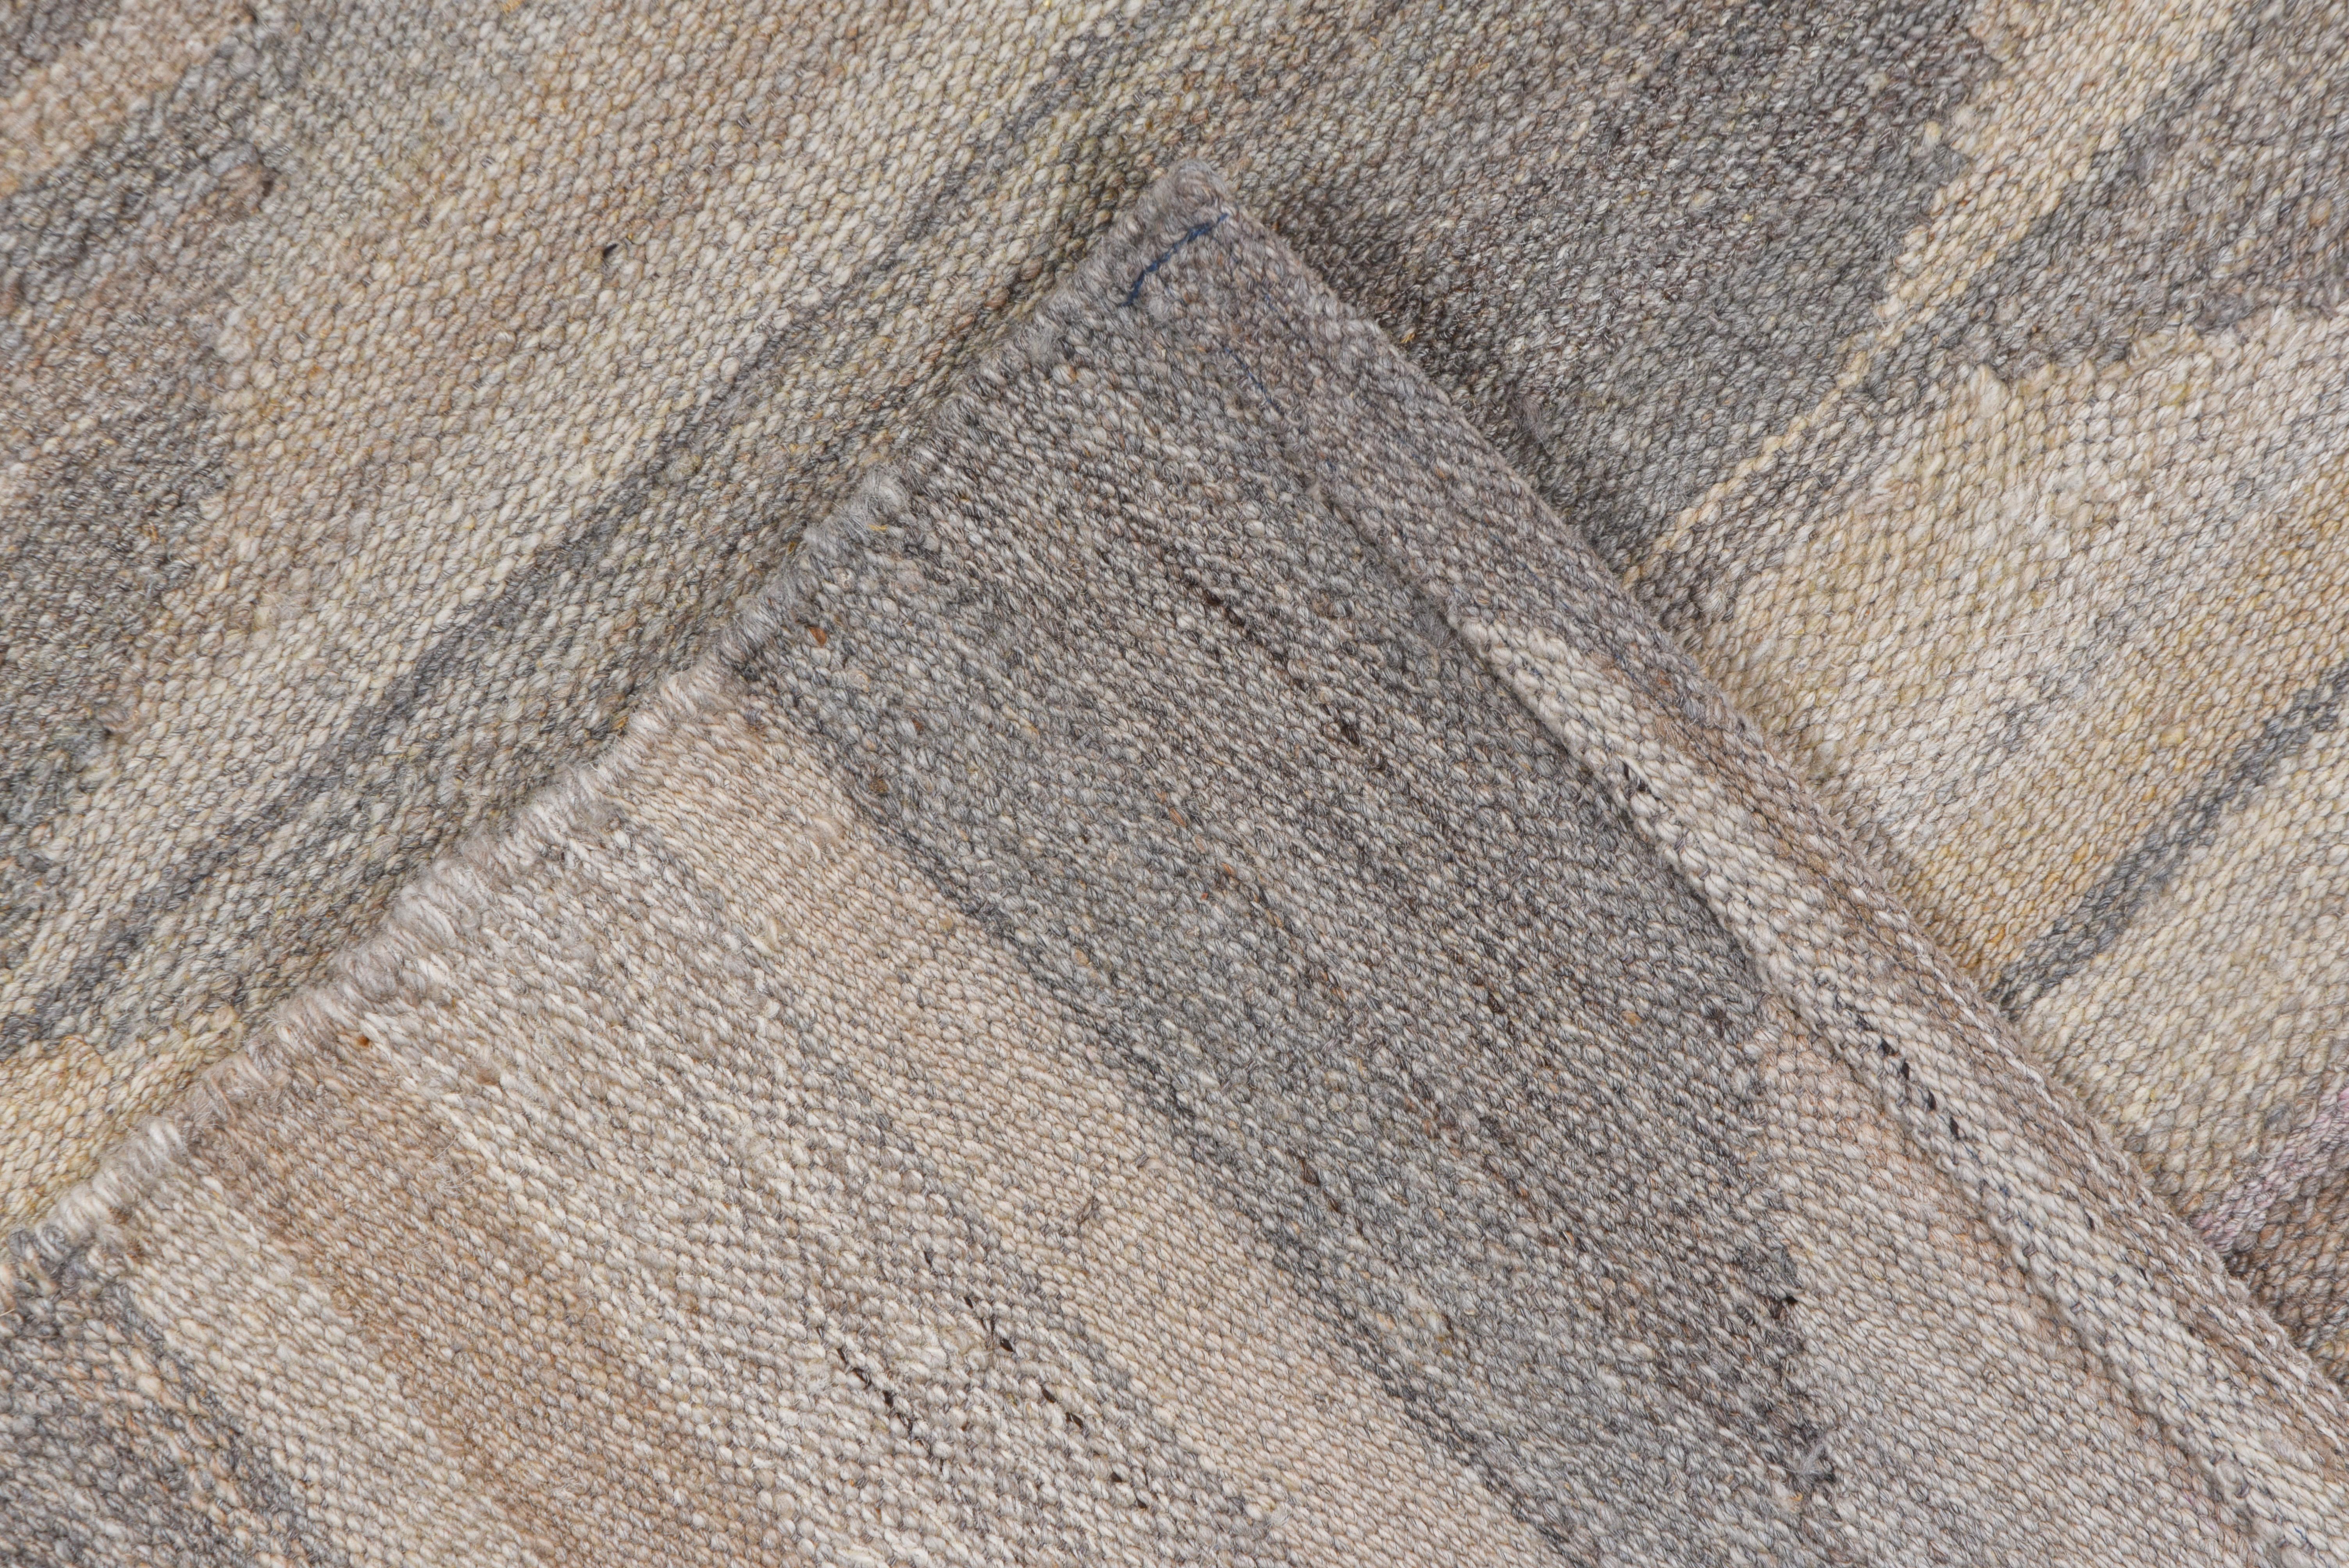 A wave like repeating pattern with contrasting neutrals is woven on this flatweave rug. Tones include, linen, sand, gray and taupe.